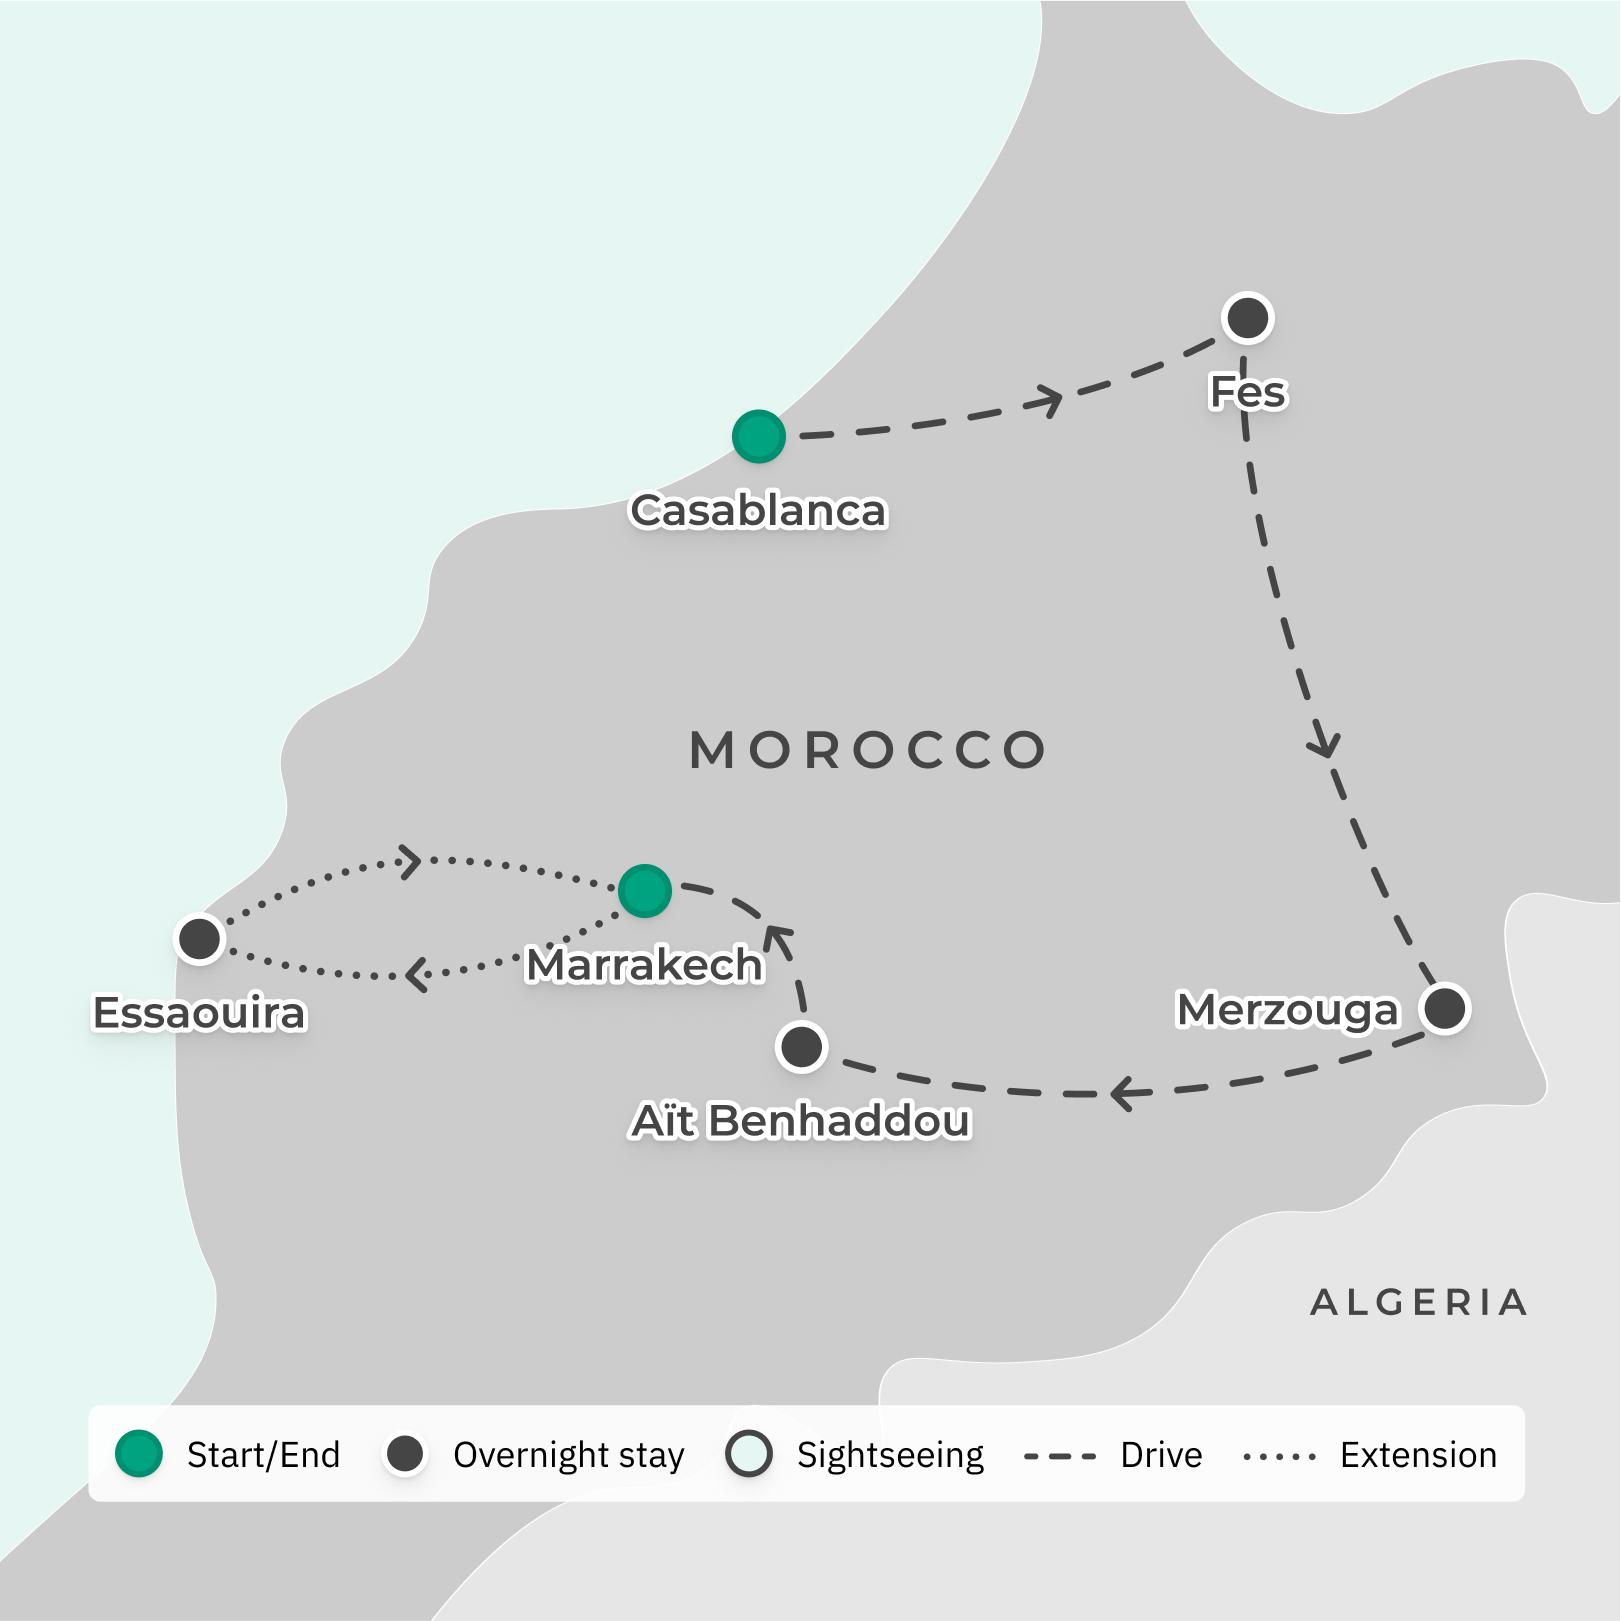 Morocco Luxury Small-Group Tour with Desert Glamping & Five-Star Stays, Camel Ride, 4WD Safari & Dinner Under the Stars route map